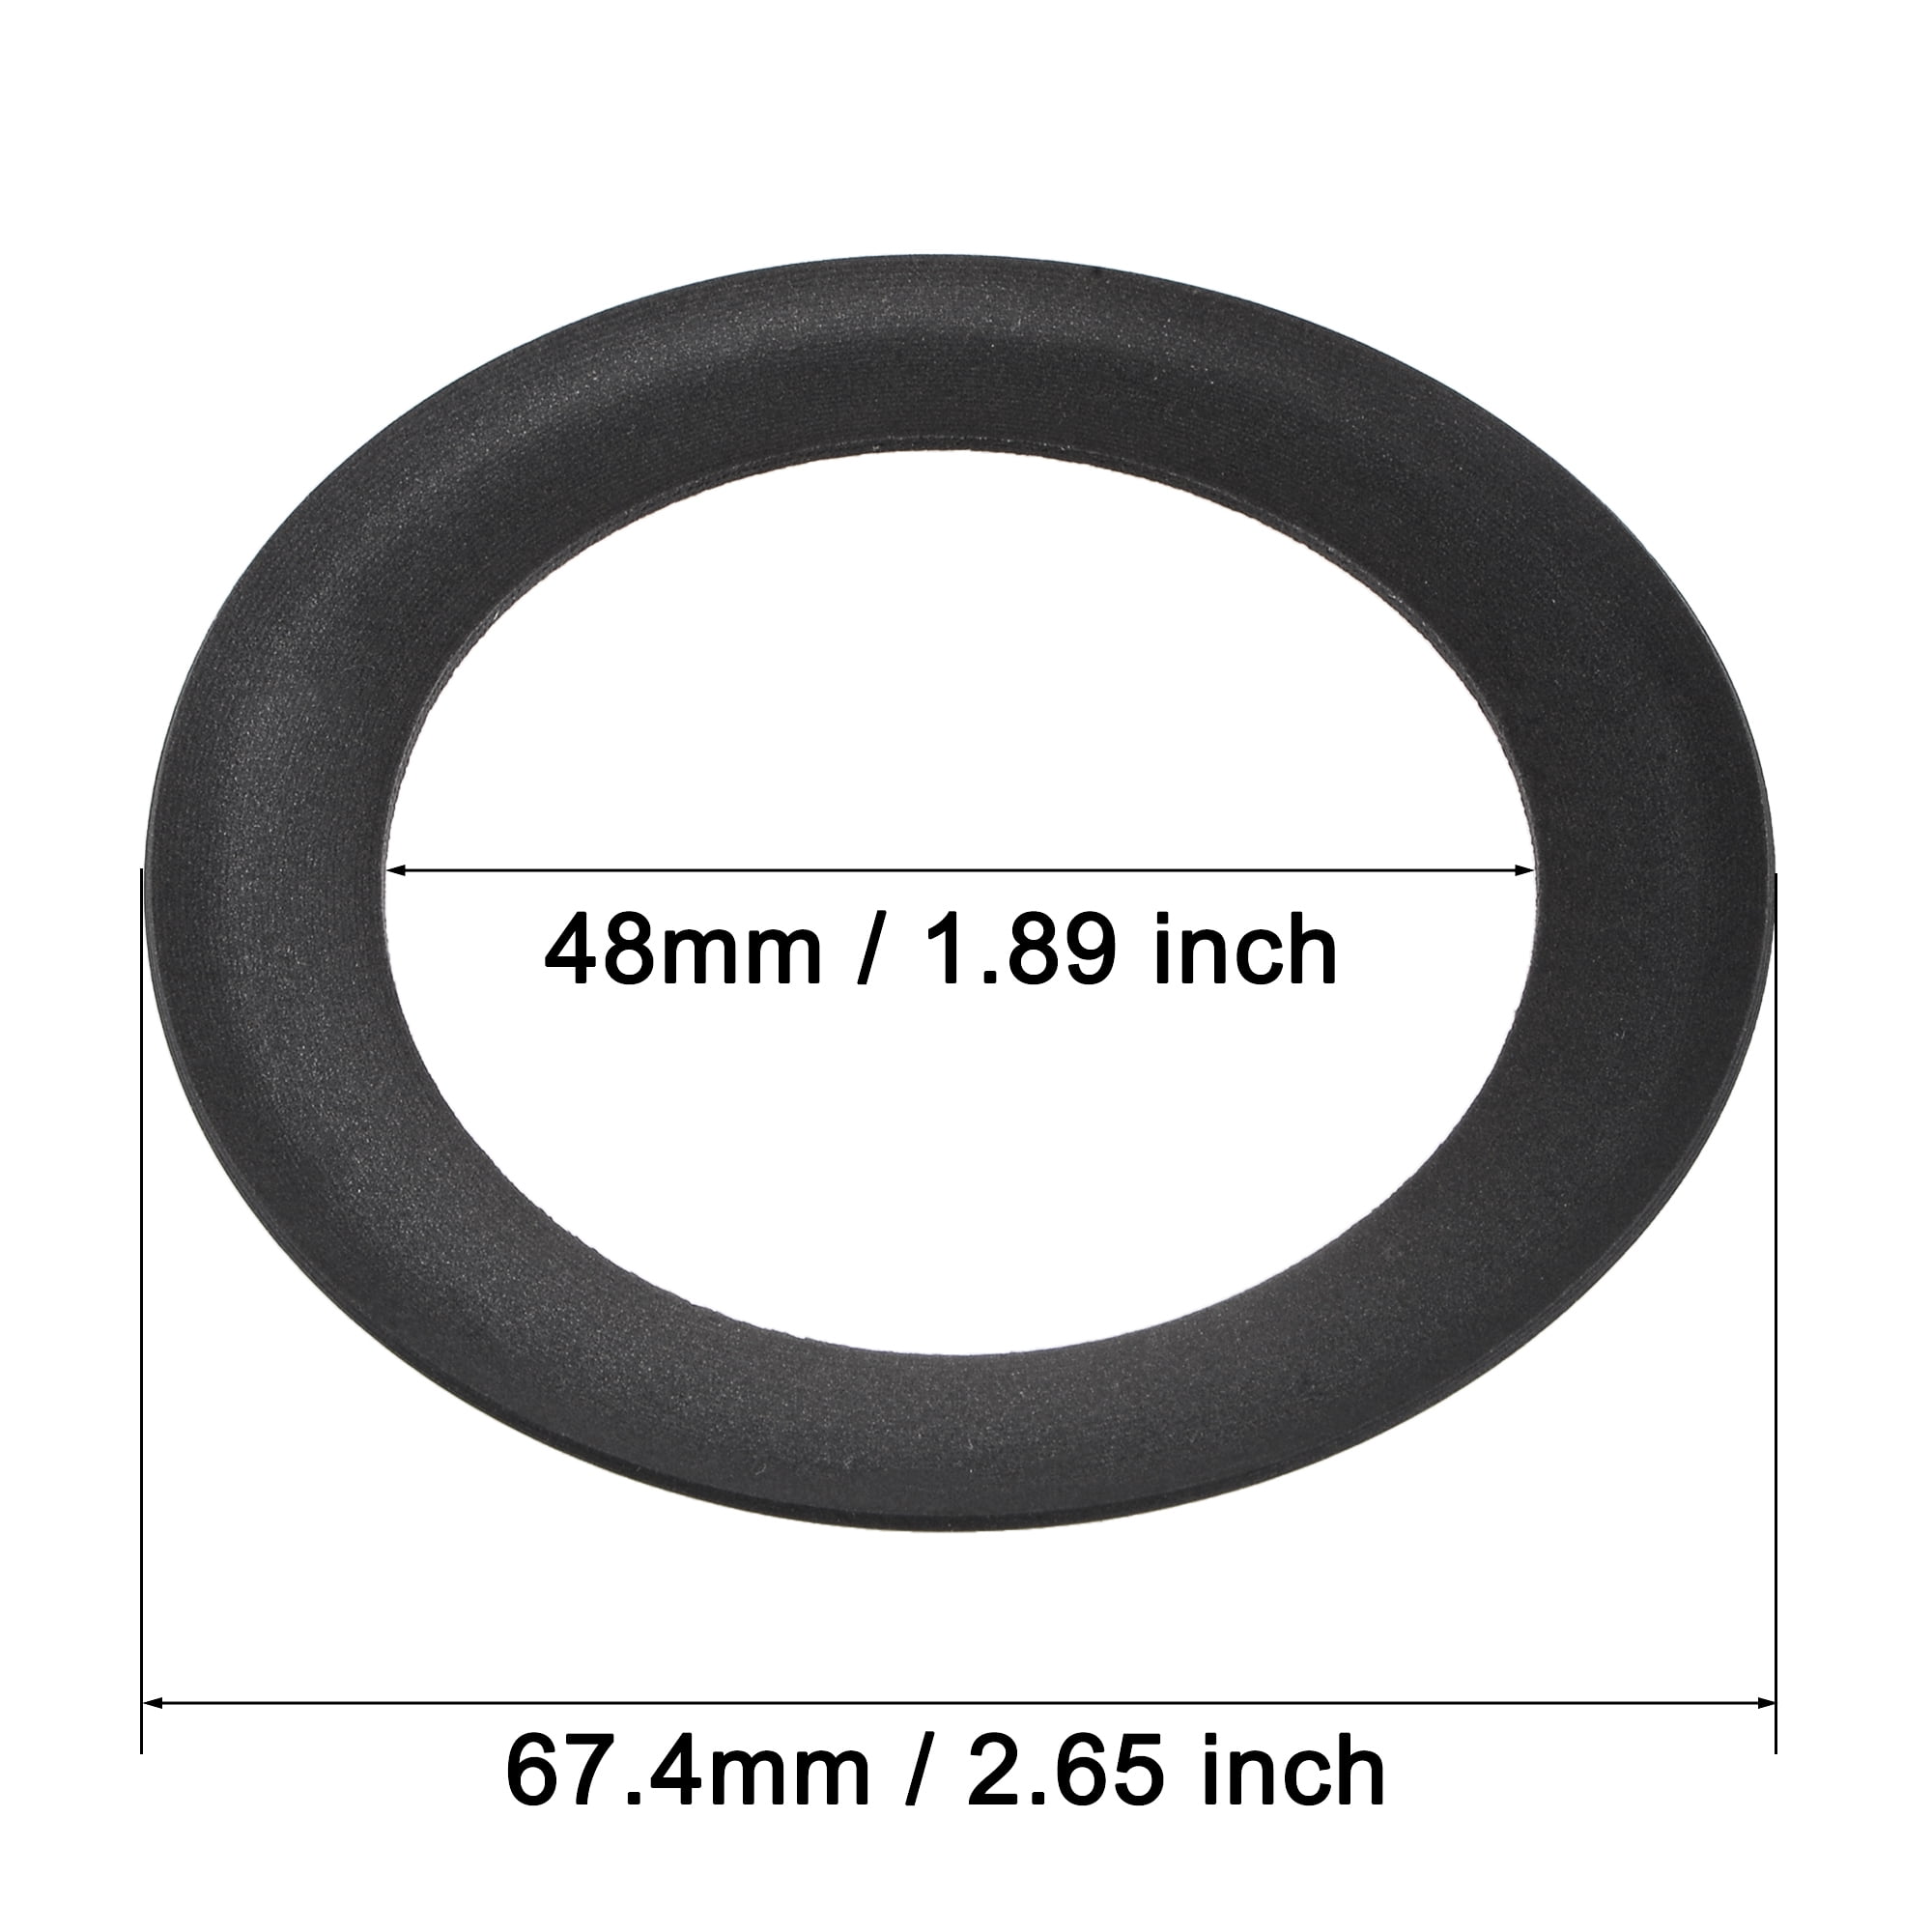 uxcell Air Compressor Compression Piston Ring Replacement Part 67.4mm OD 48mm ID 0.8mm Thickness Dark Gray